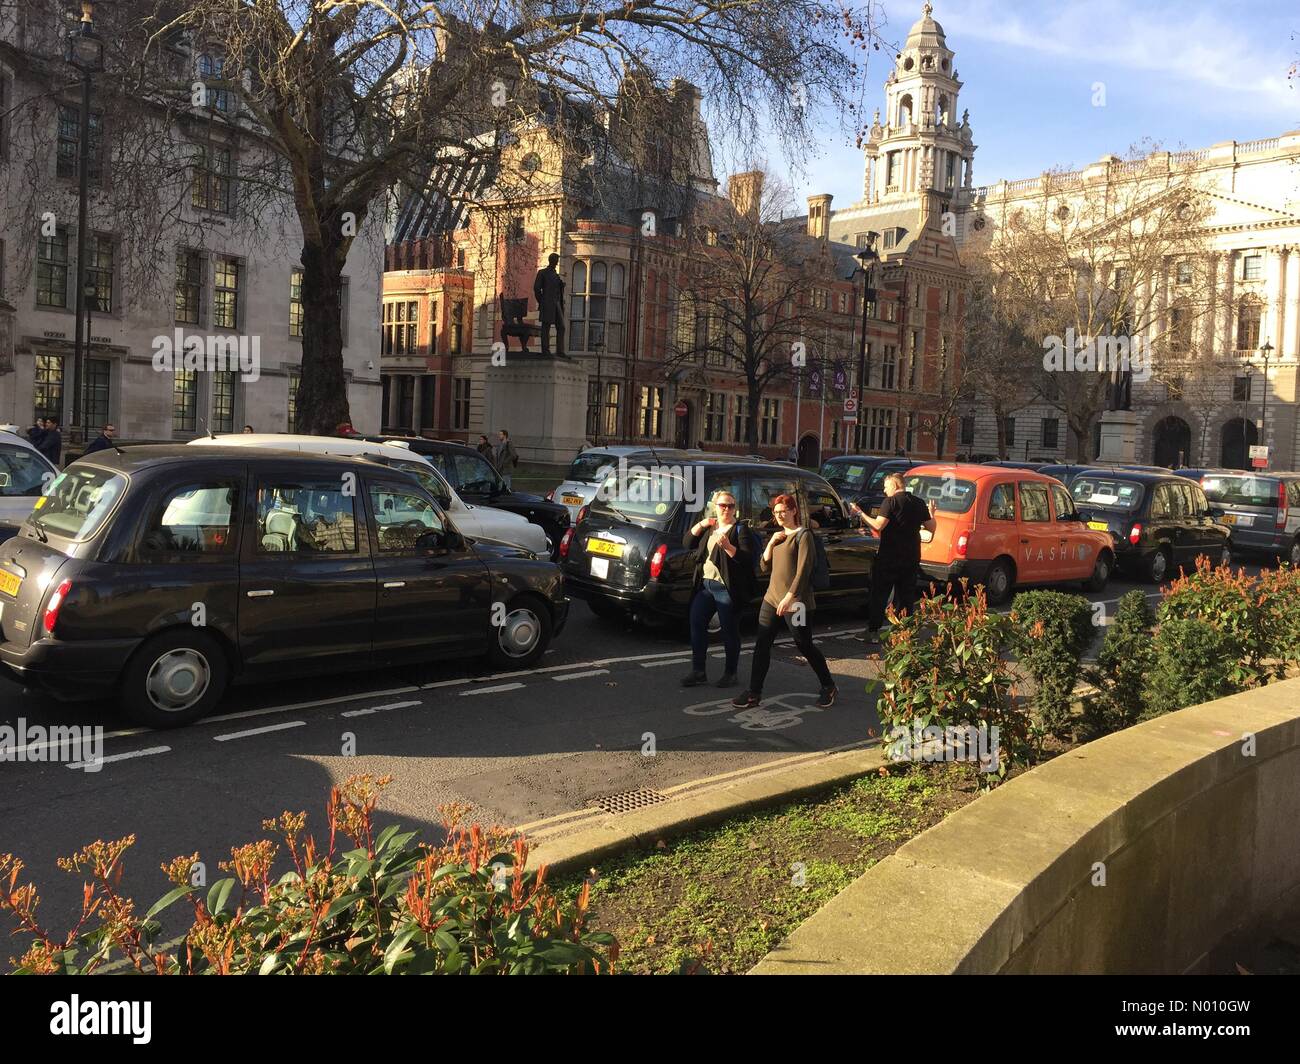 Parliament Square, London, UK. 22nd Feb 2019. Black cab drivers protest proposed changes to their licence Credit: Bridget1/StockimoNews/Alamy Live News Stock Photo